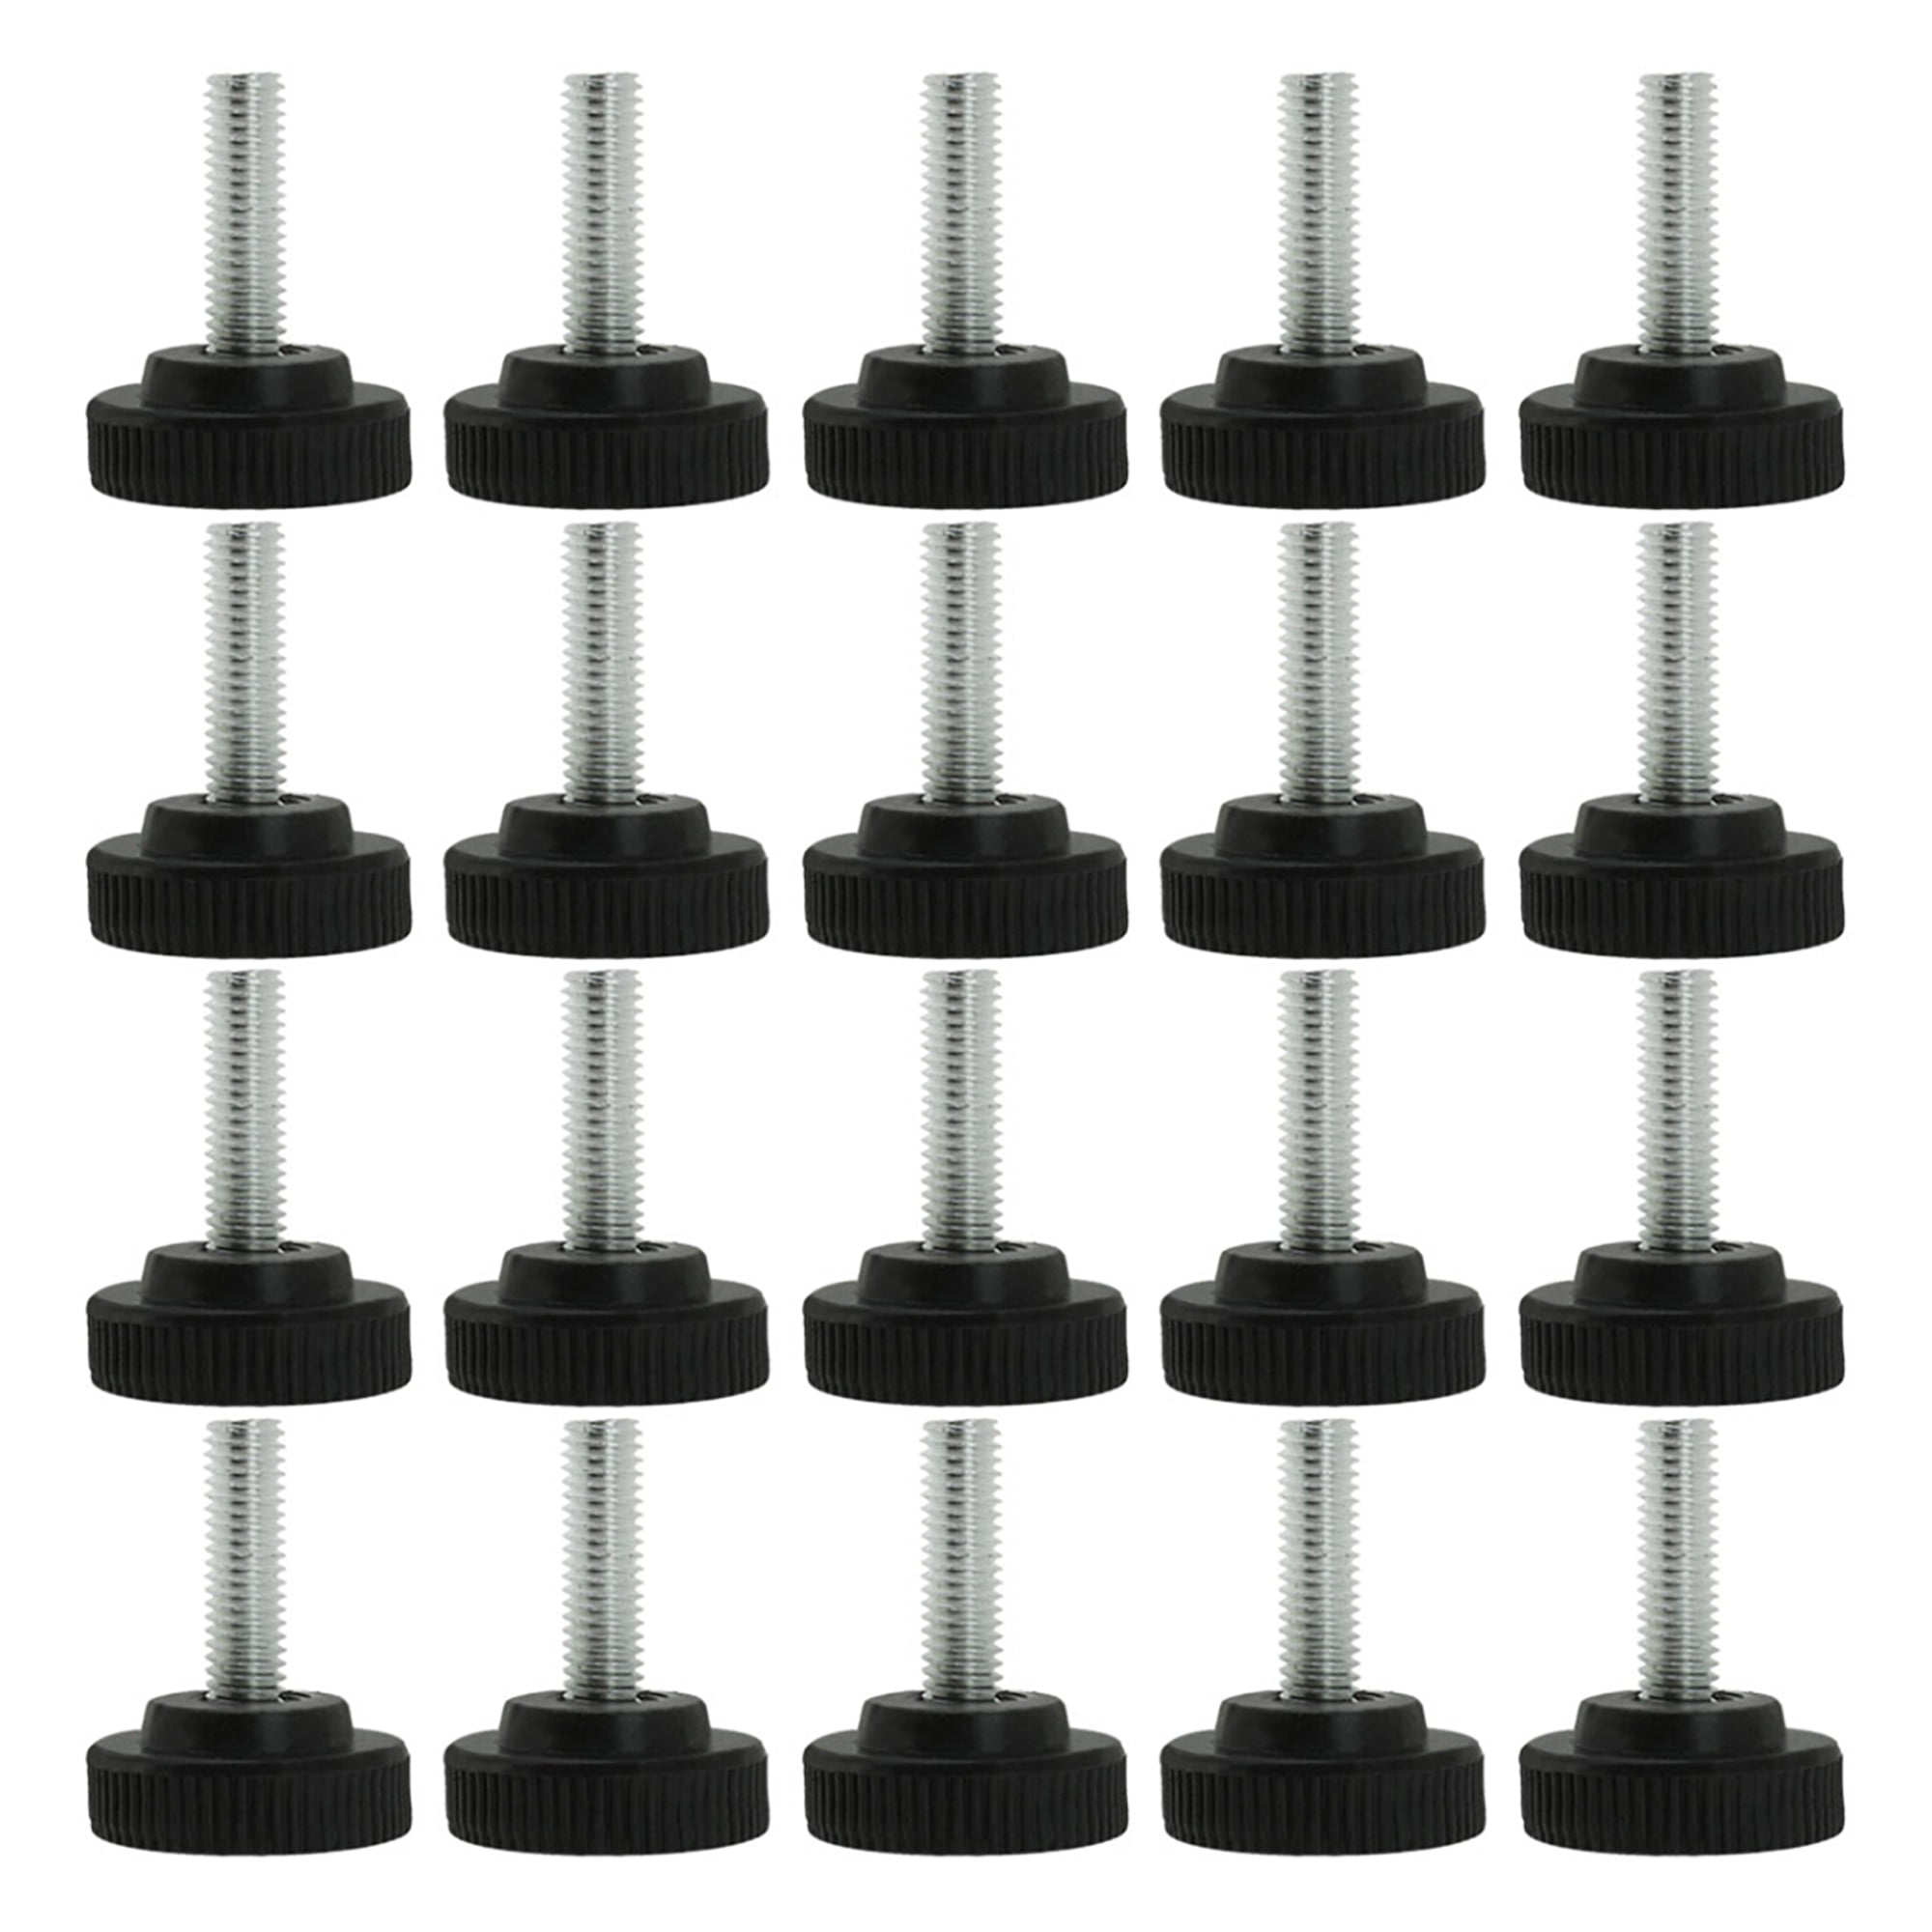 uxcell M8 x 20 x 38mm Screw on Furniture Glide Leveling Feet Floor Protector Adjustable Leveler with T-Nuts for Chair Leg 4 Pack